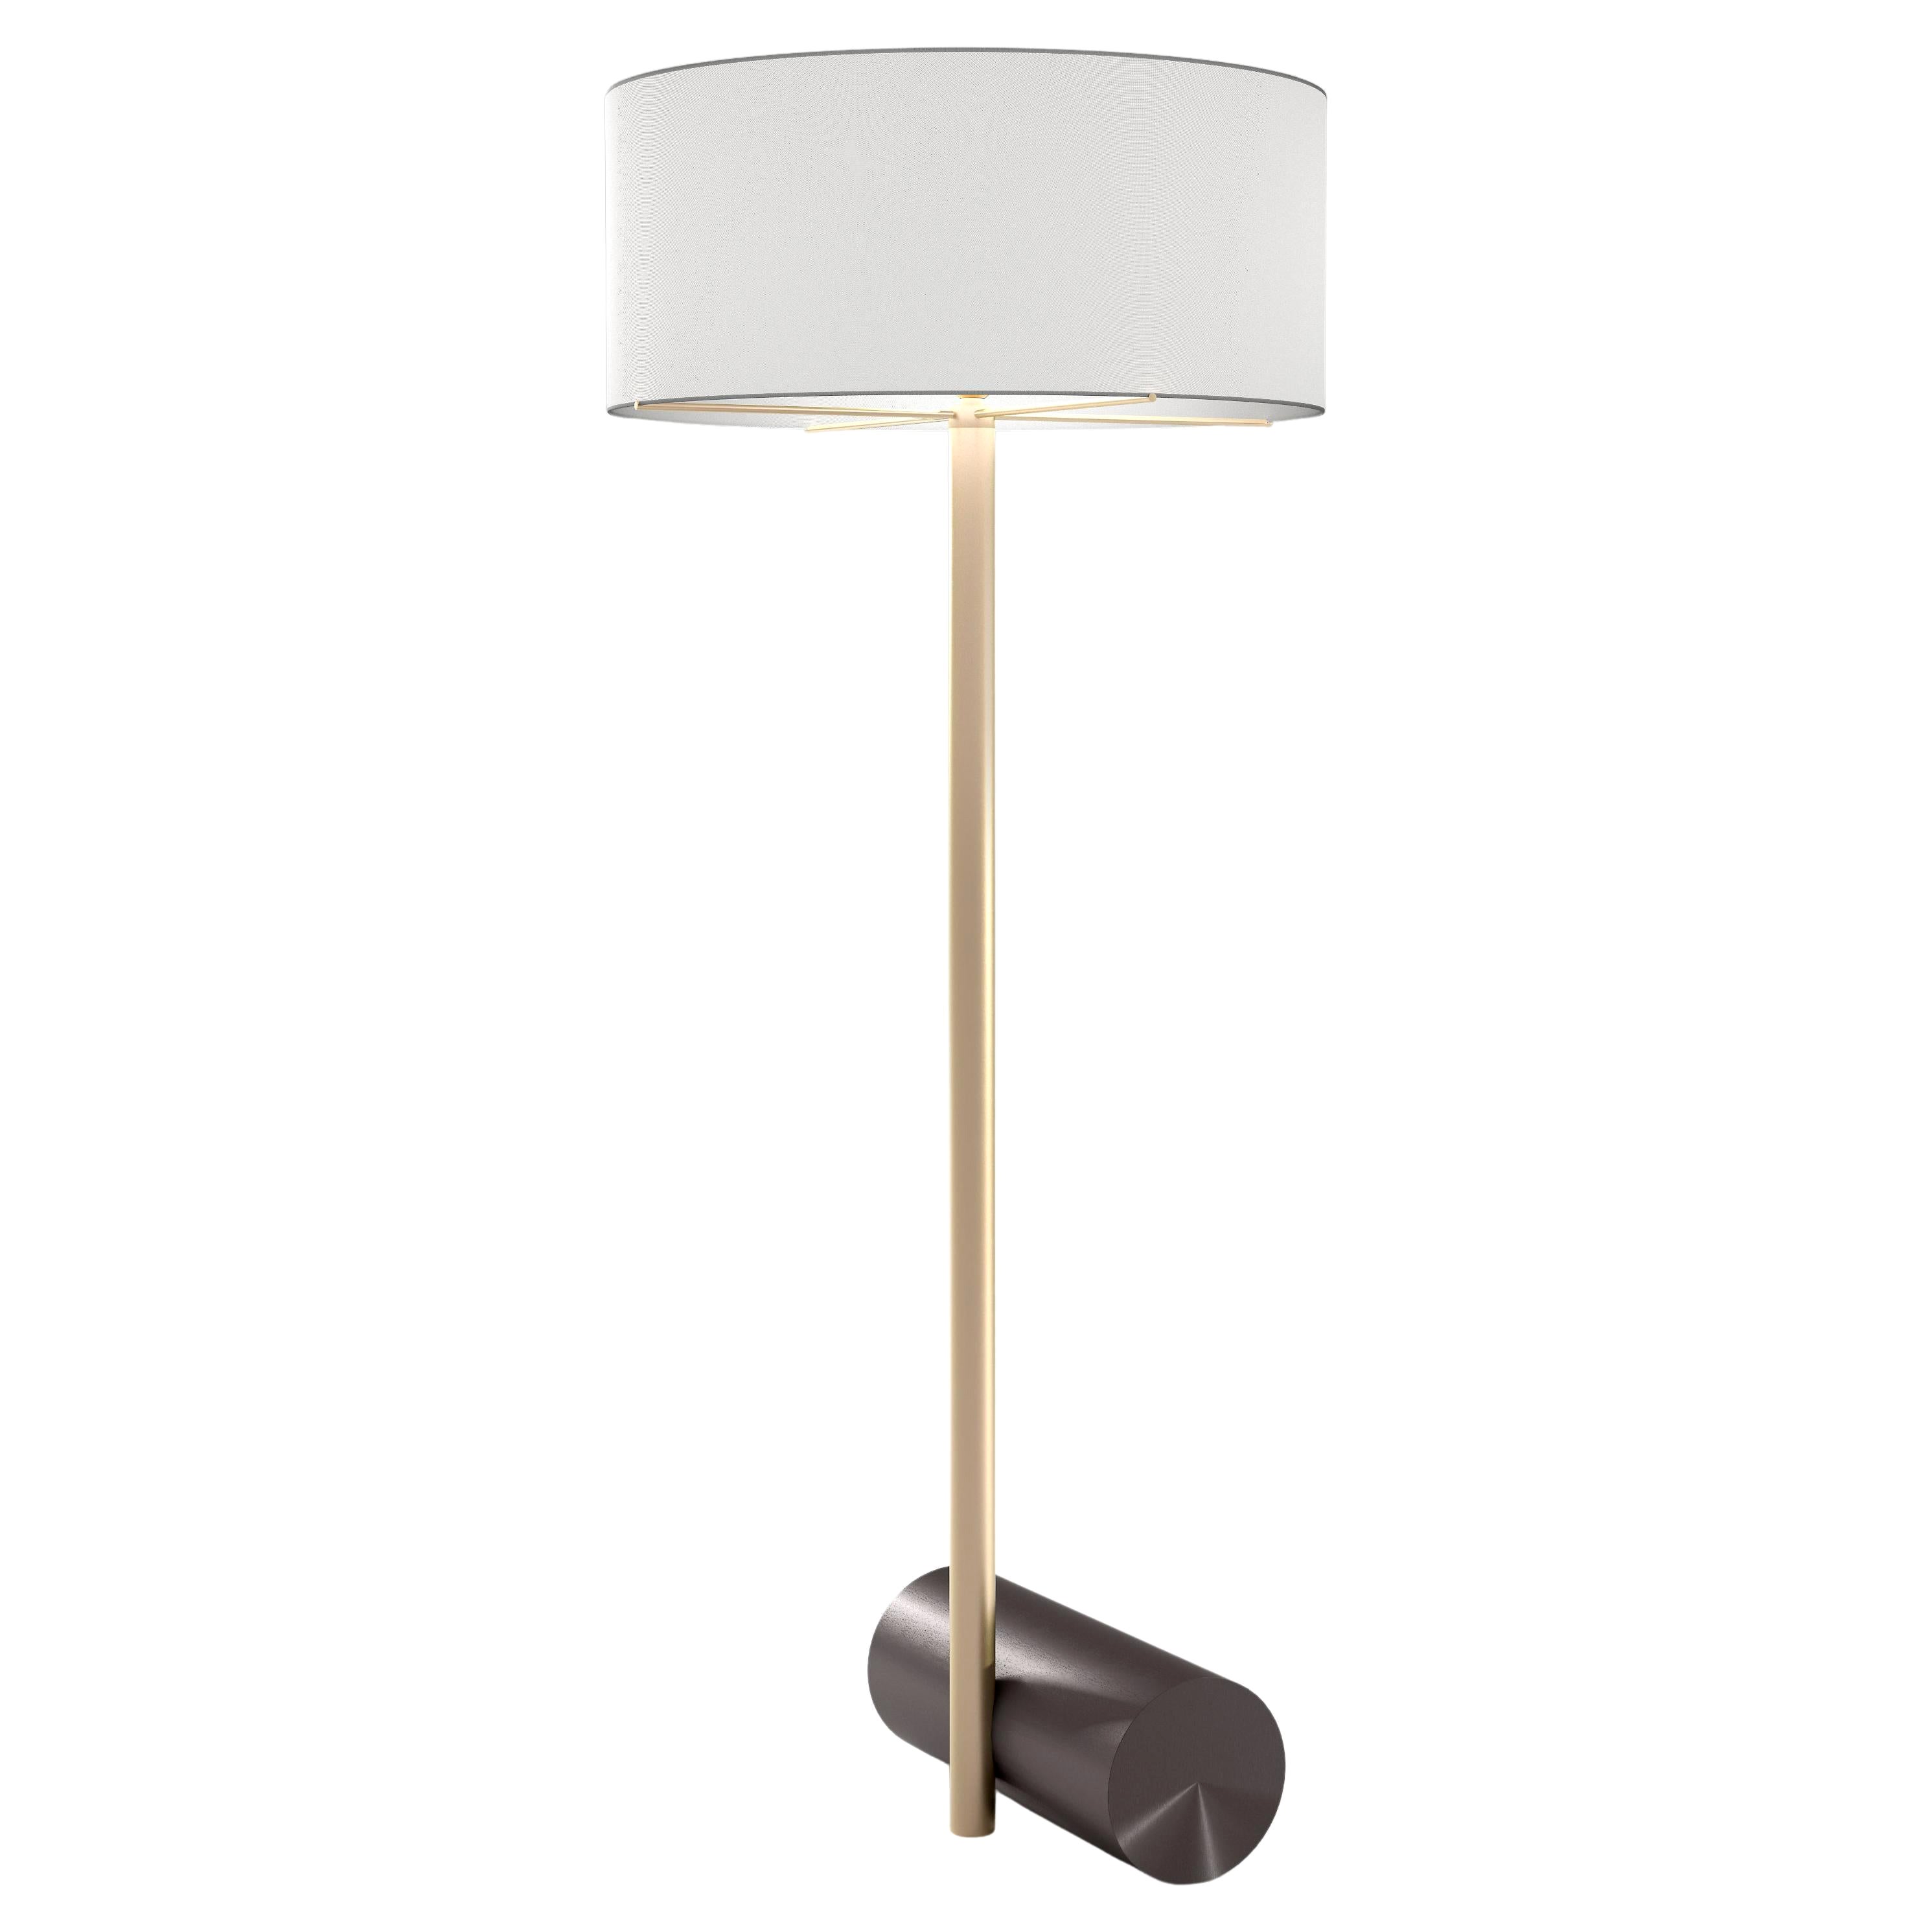 Calee XL Floor Lamp by Pool For Sale